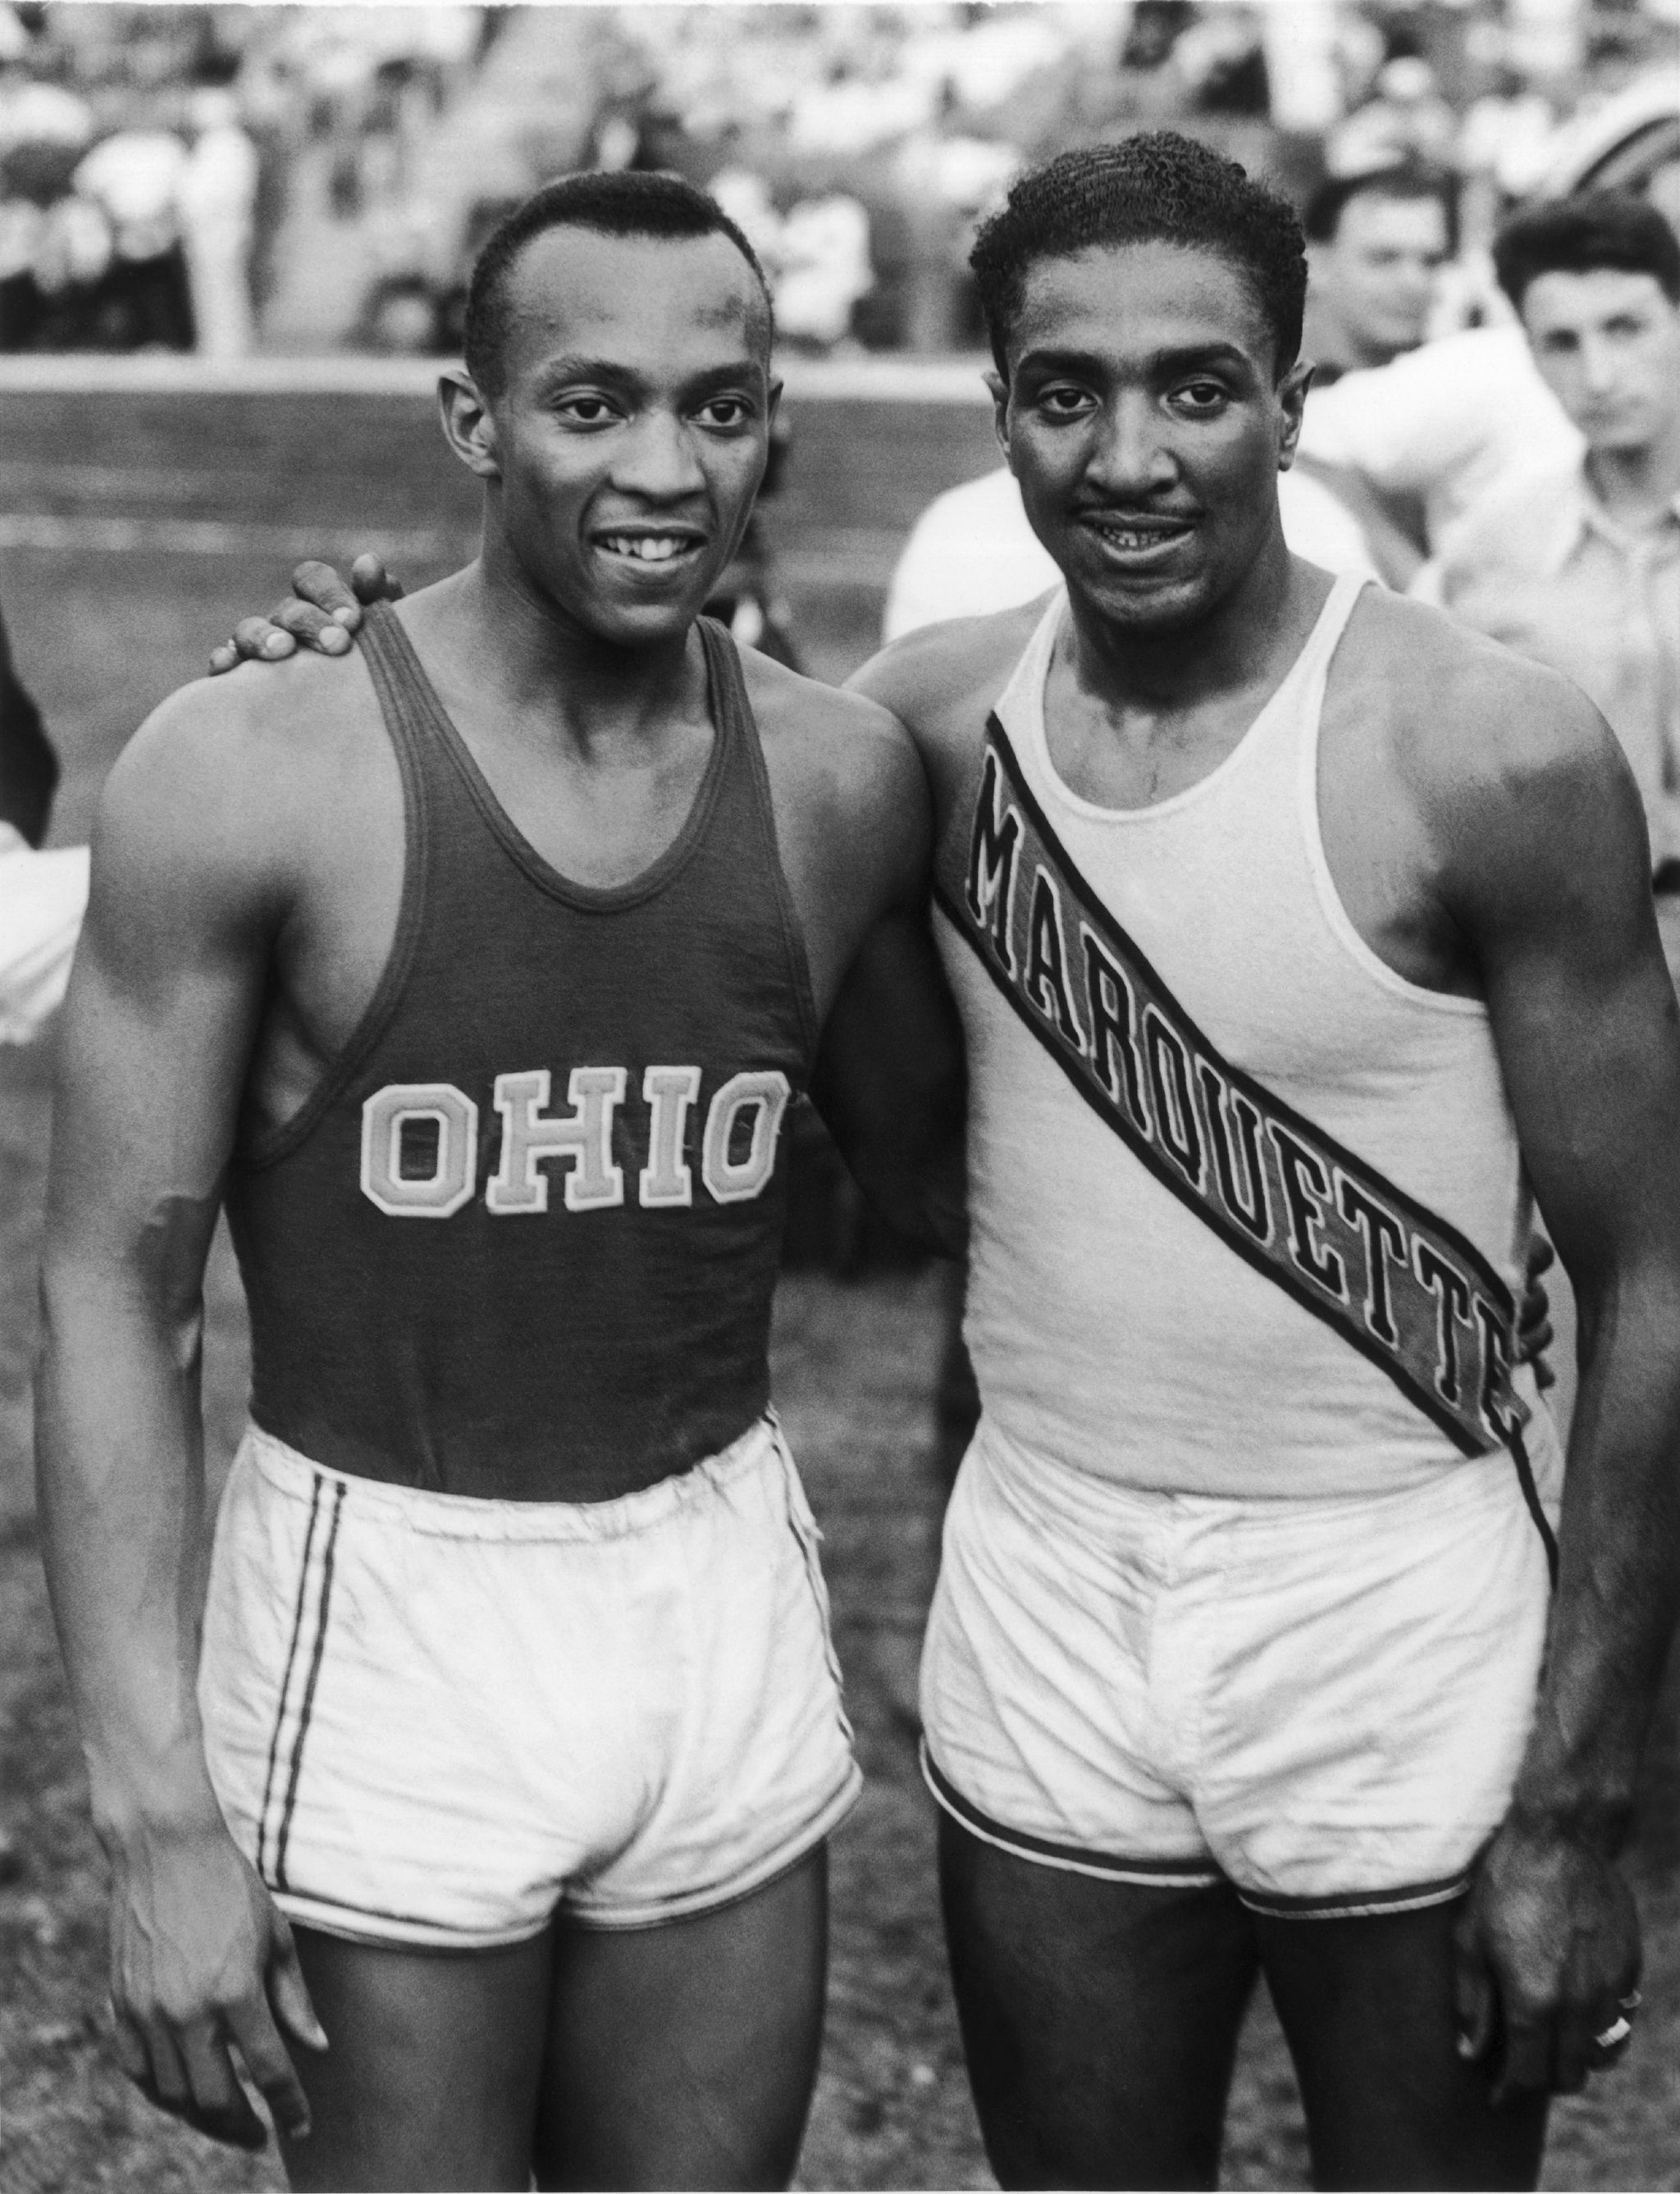 united states   january 01  the american sprinters jesse owens and ralph metcalfe in new york in 1936 before leaving for berlin, germany where the olympic games were to take place, the two athletes participated in a track meet on randall island in new york  photo by keystone francegamma keystone via getty images